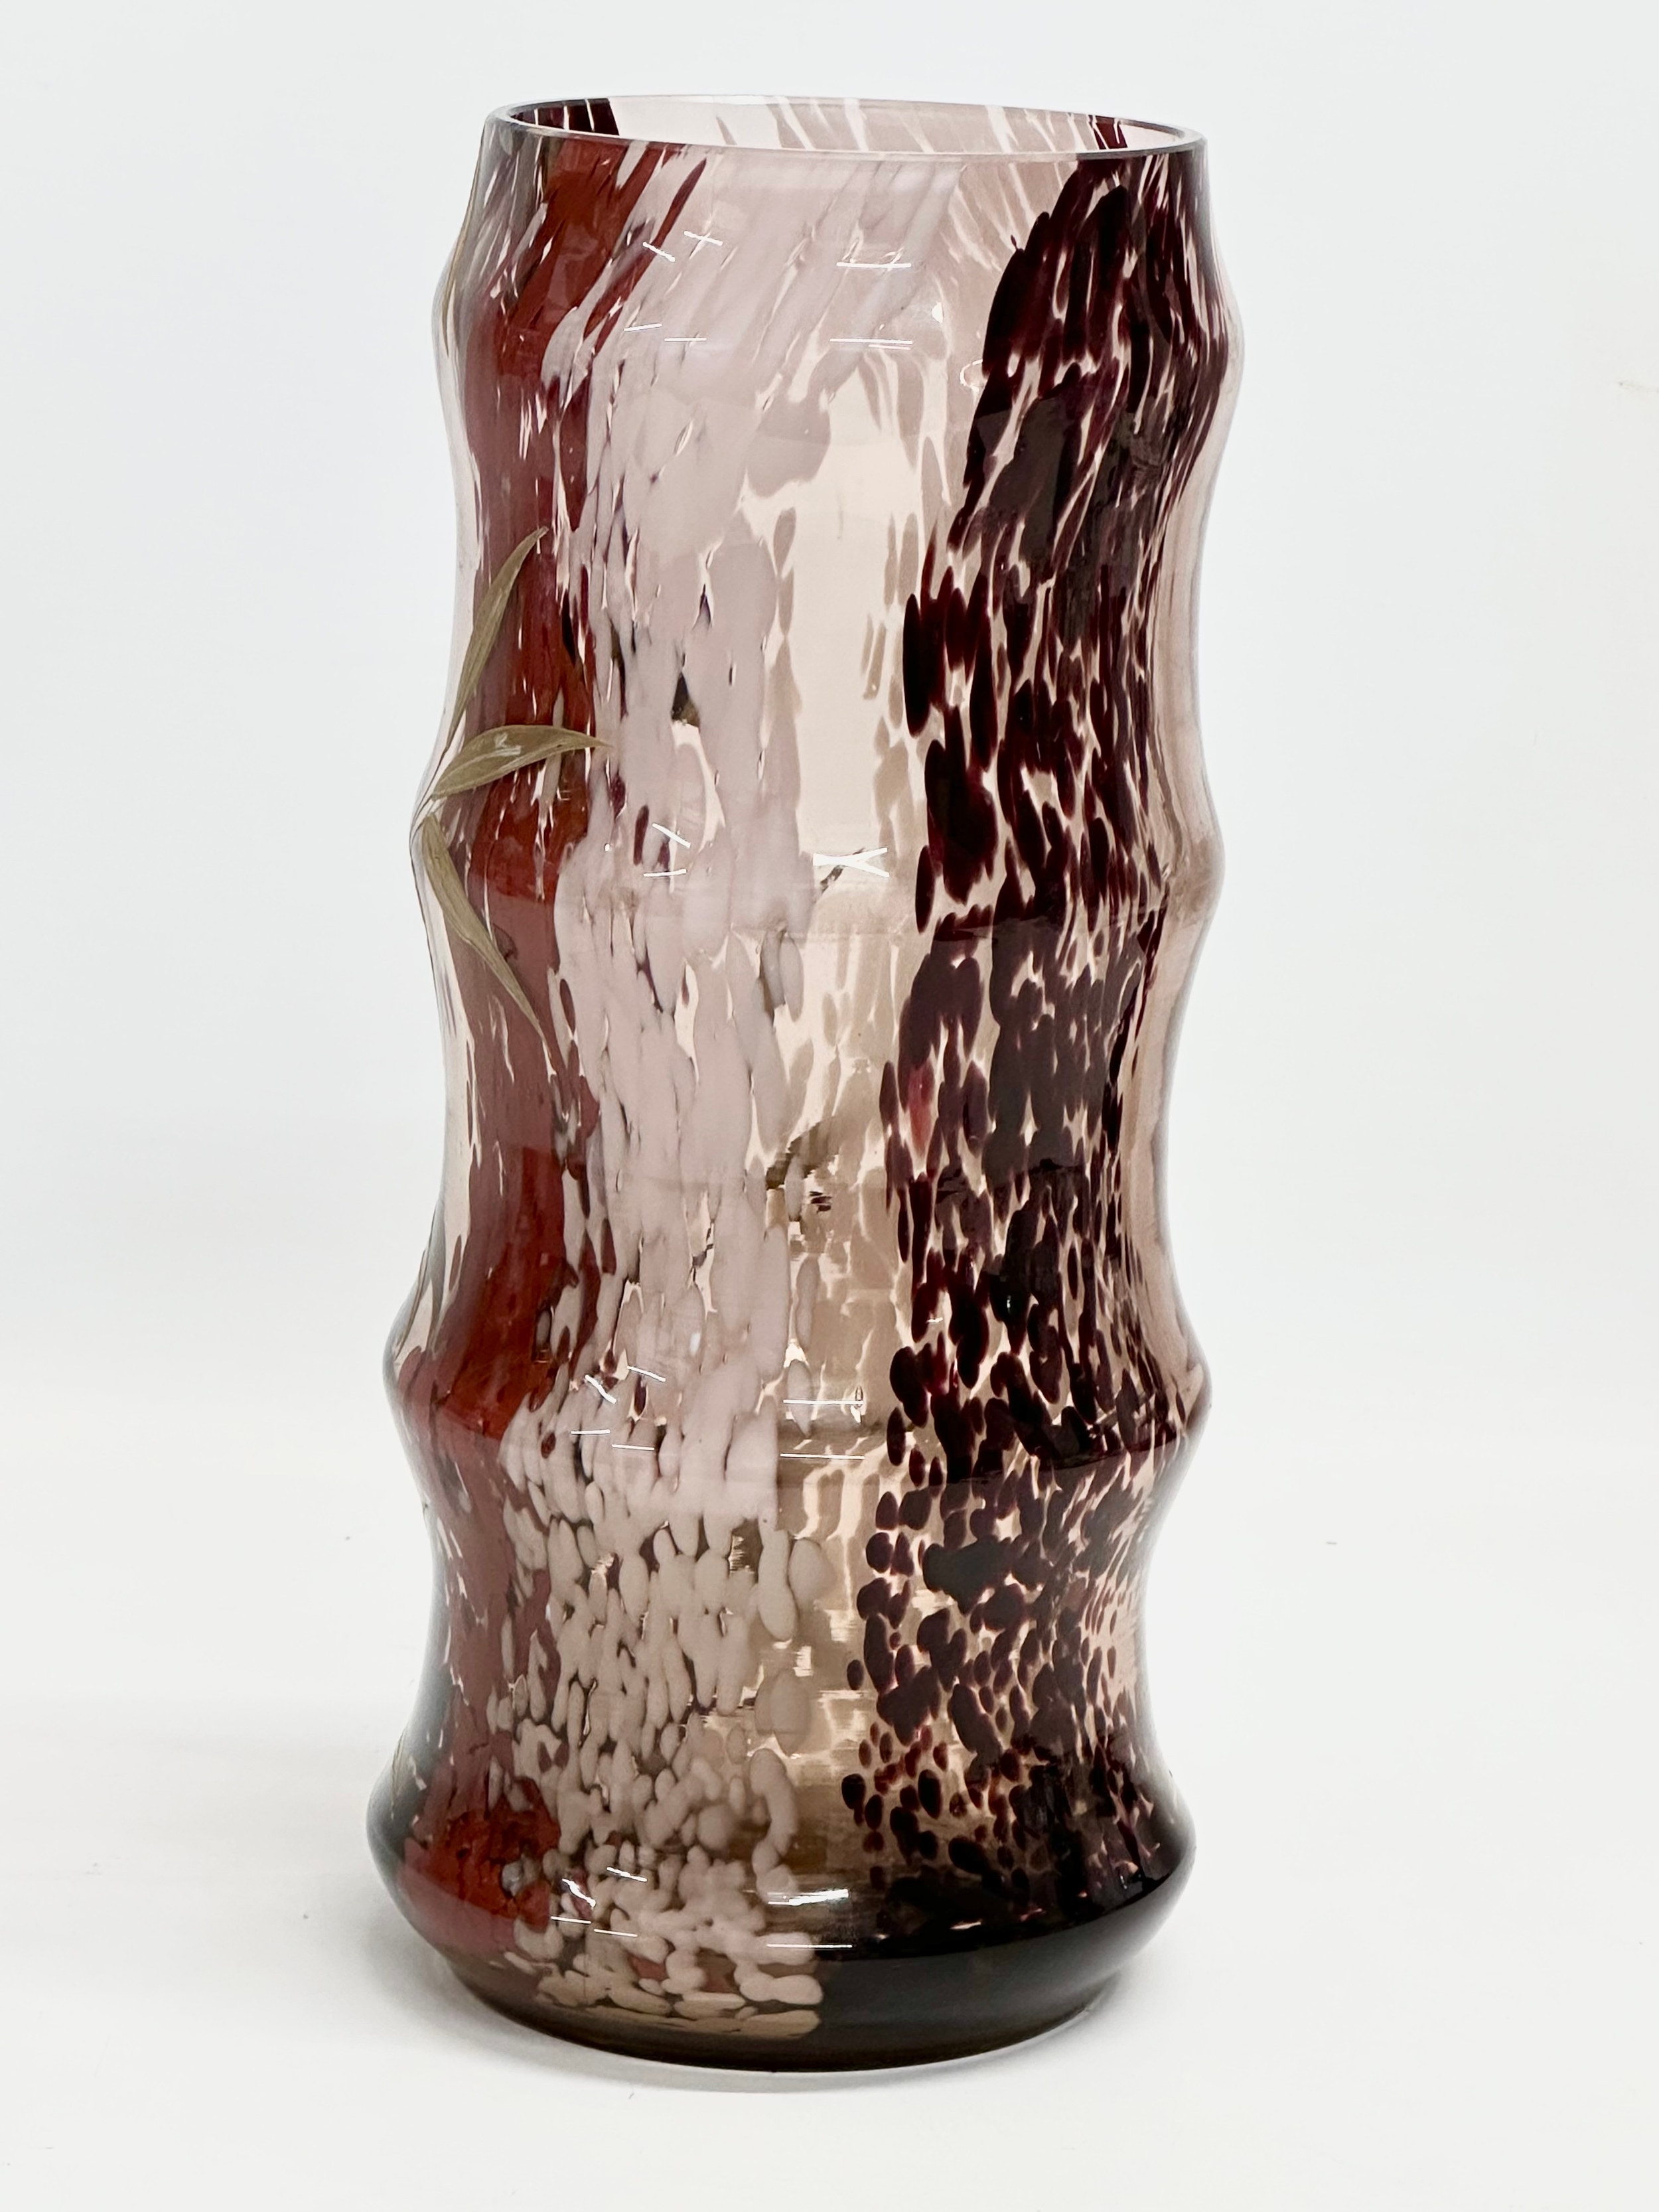 A rare Art Nouveau ‘Bamboo’ glass vase by Ernest Baptiste Leveille. Early 20th century. Circa - Image 2 of 4